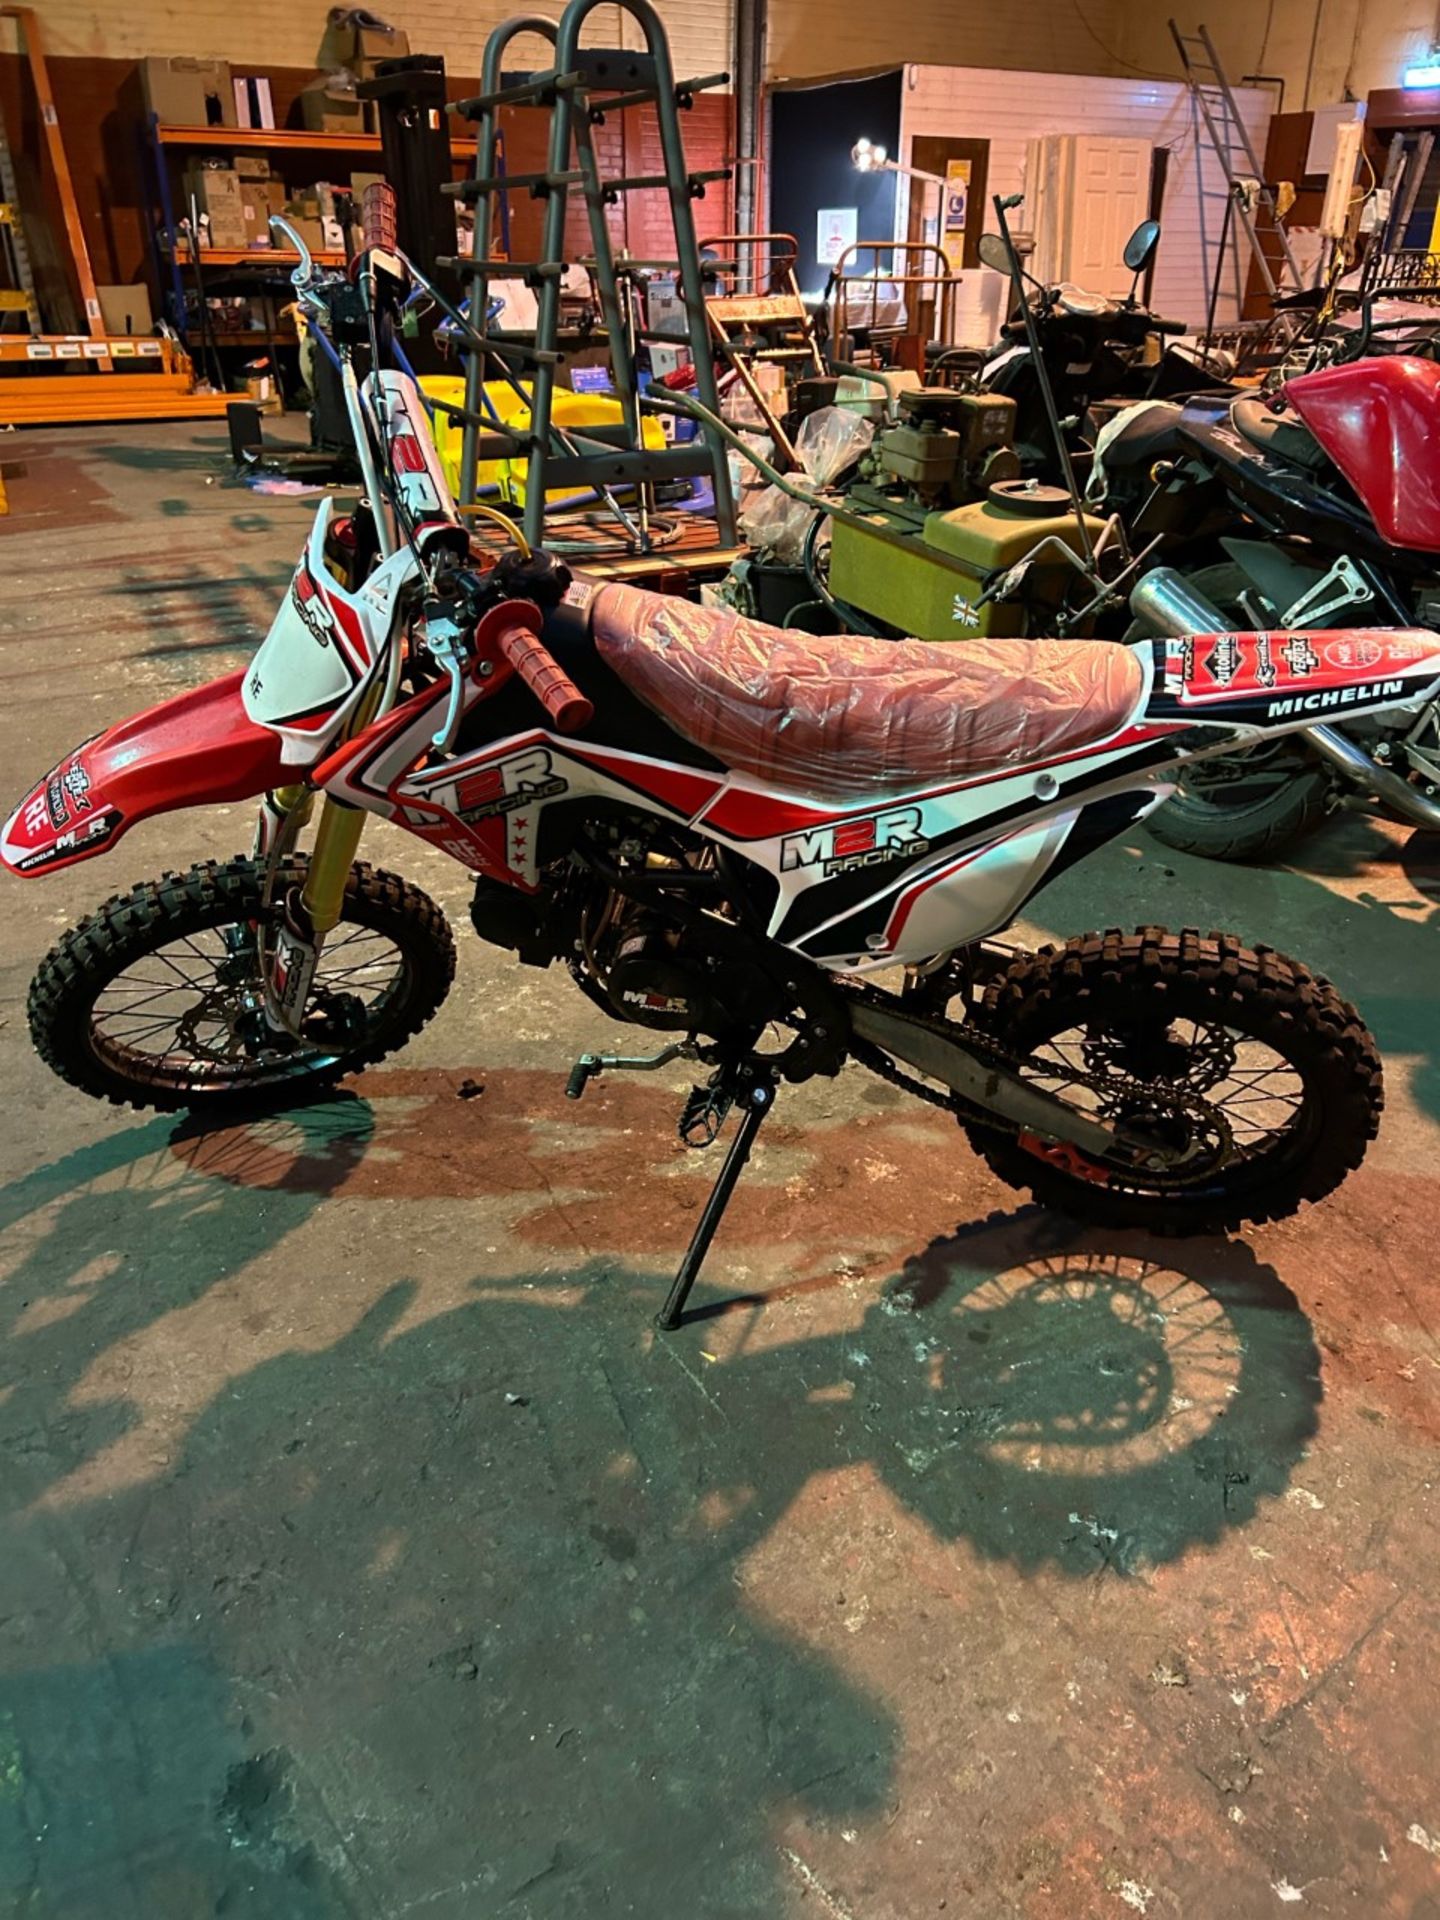 M2R racing pit bike 125cc. Perfect condition excellent little runner